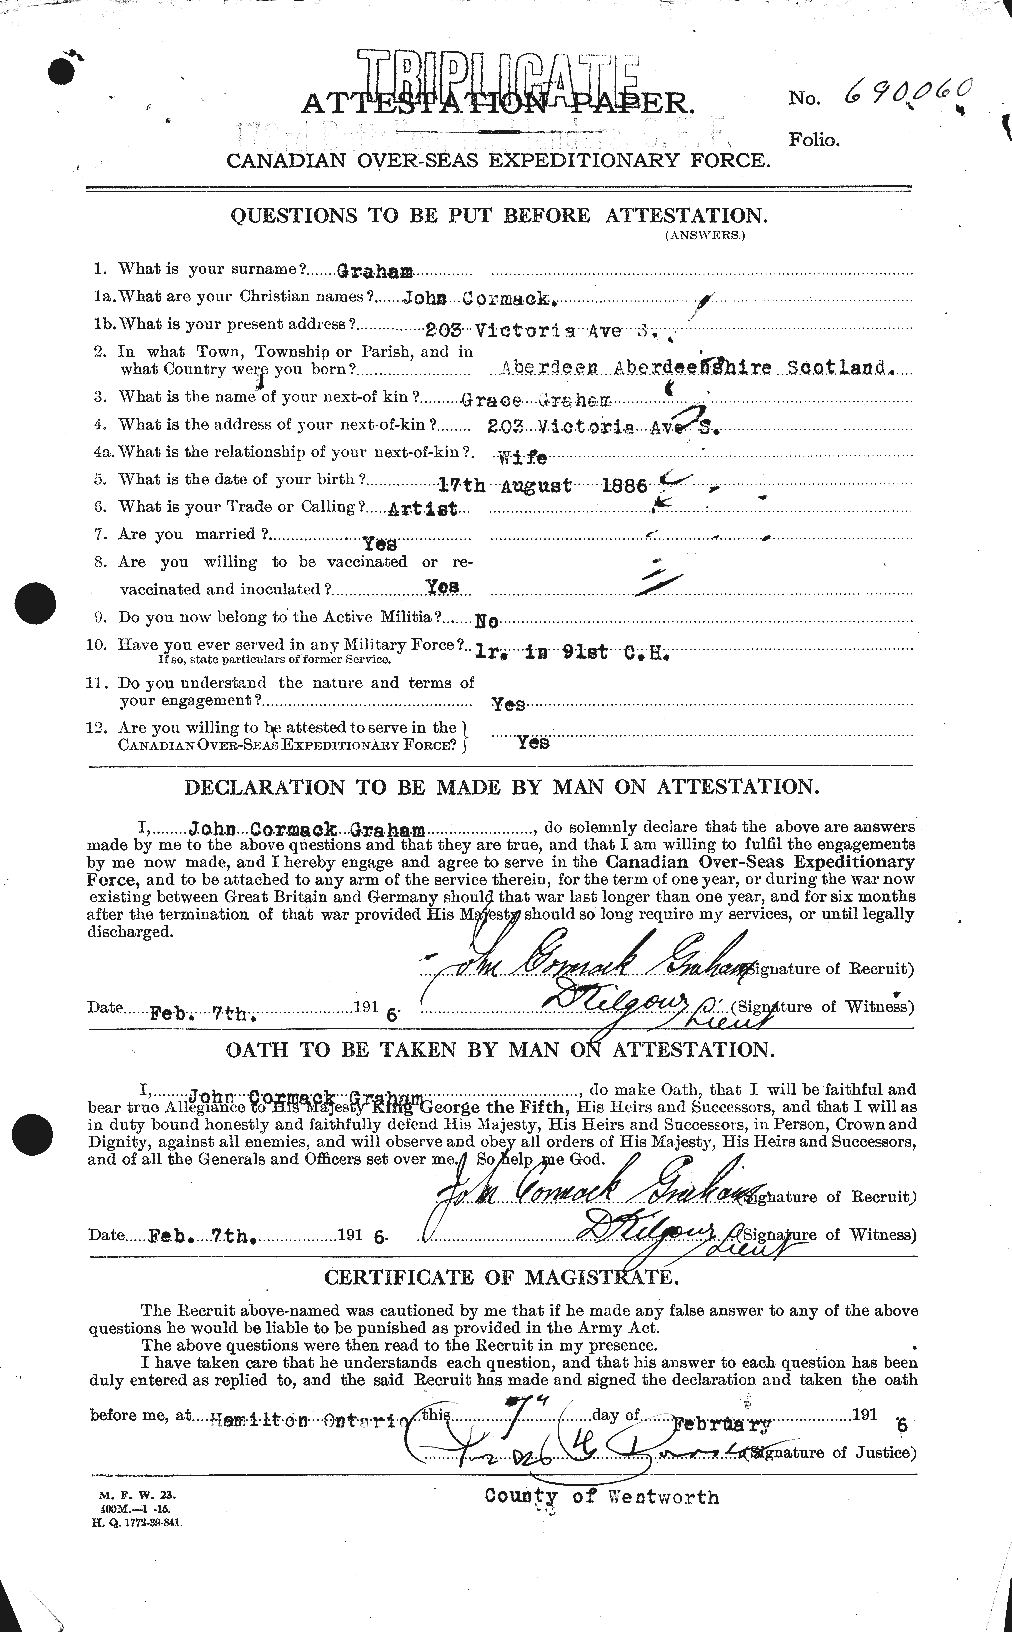 Personnel Records of the First World War - CEF 359167a